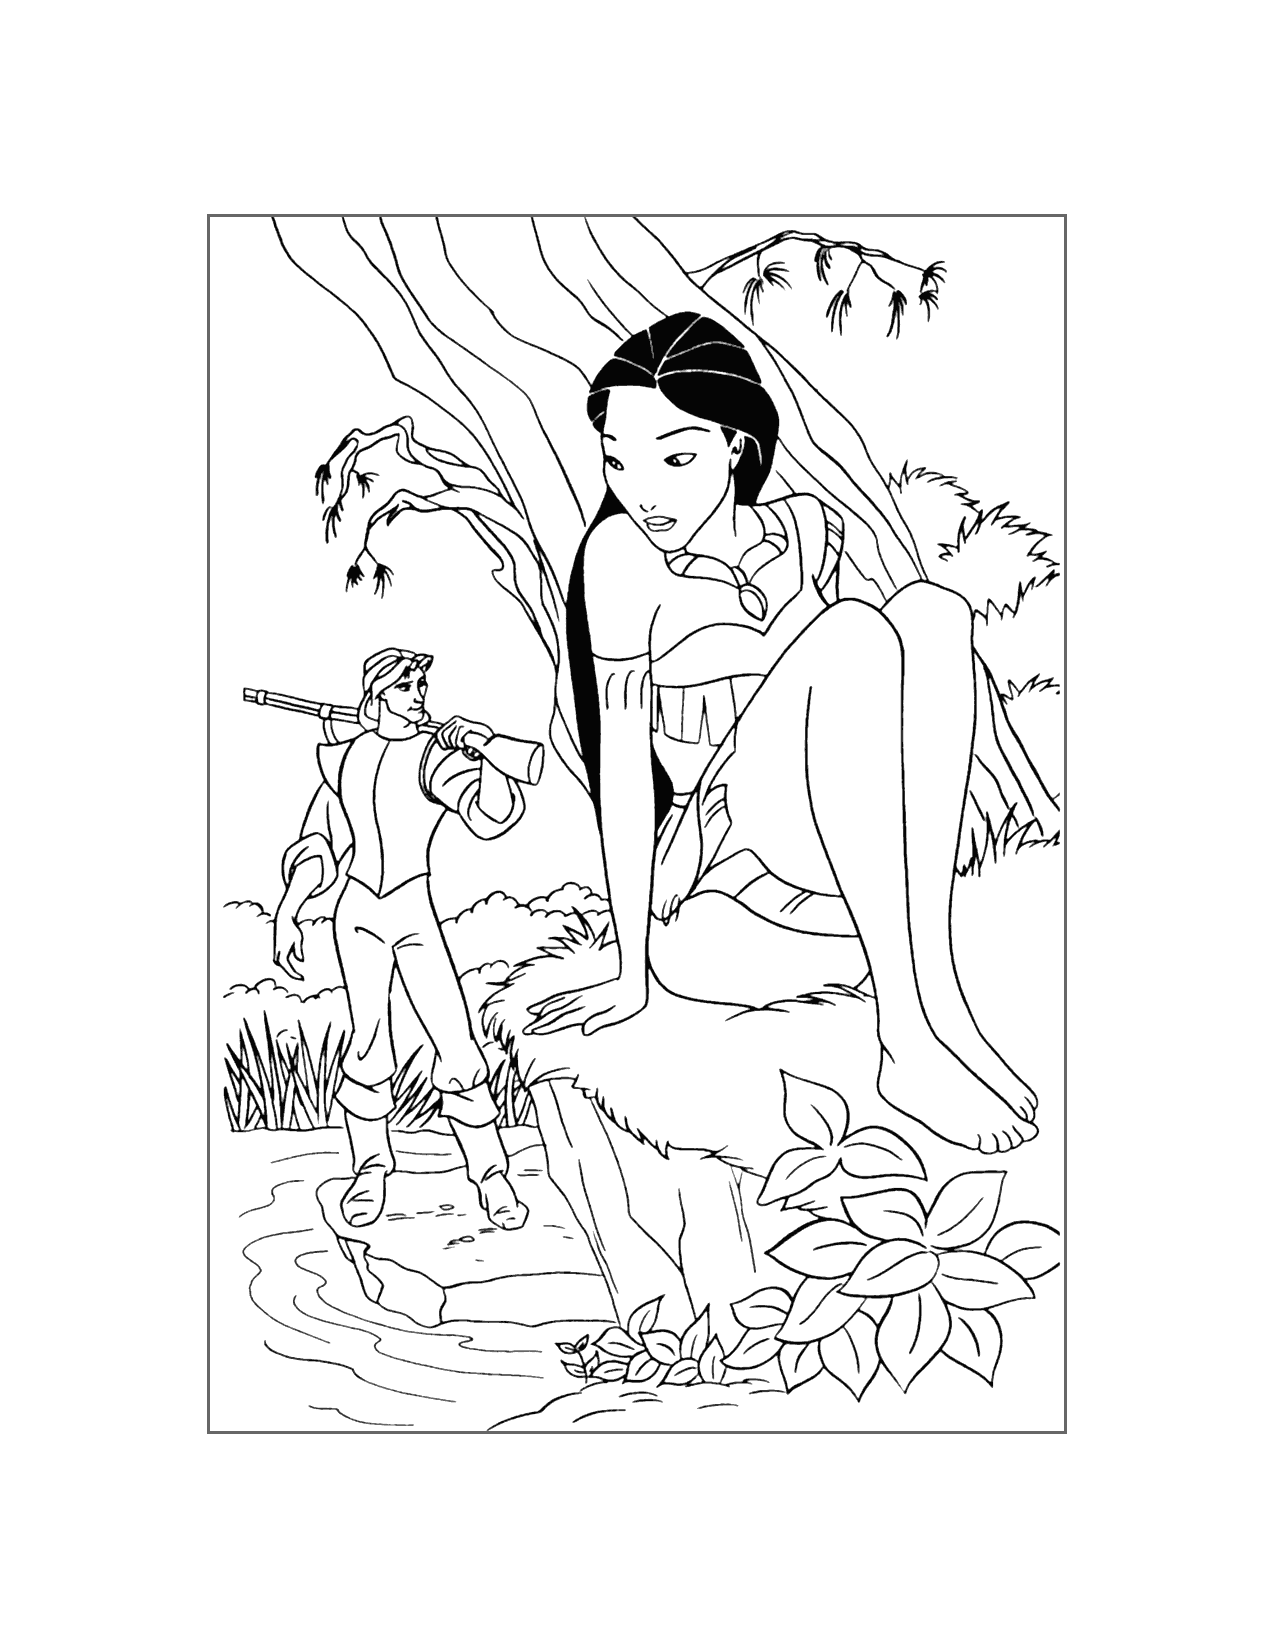 Pocahontas Spies On John Smith Coloring Page